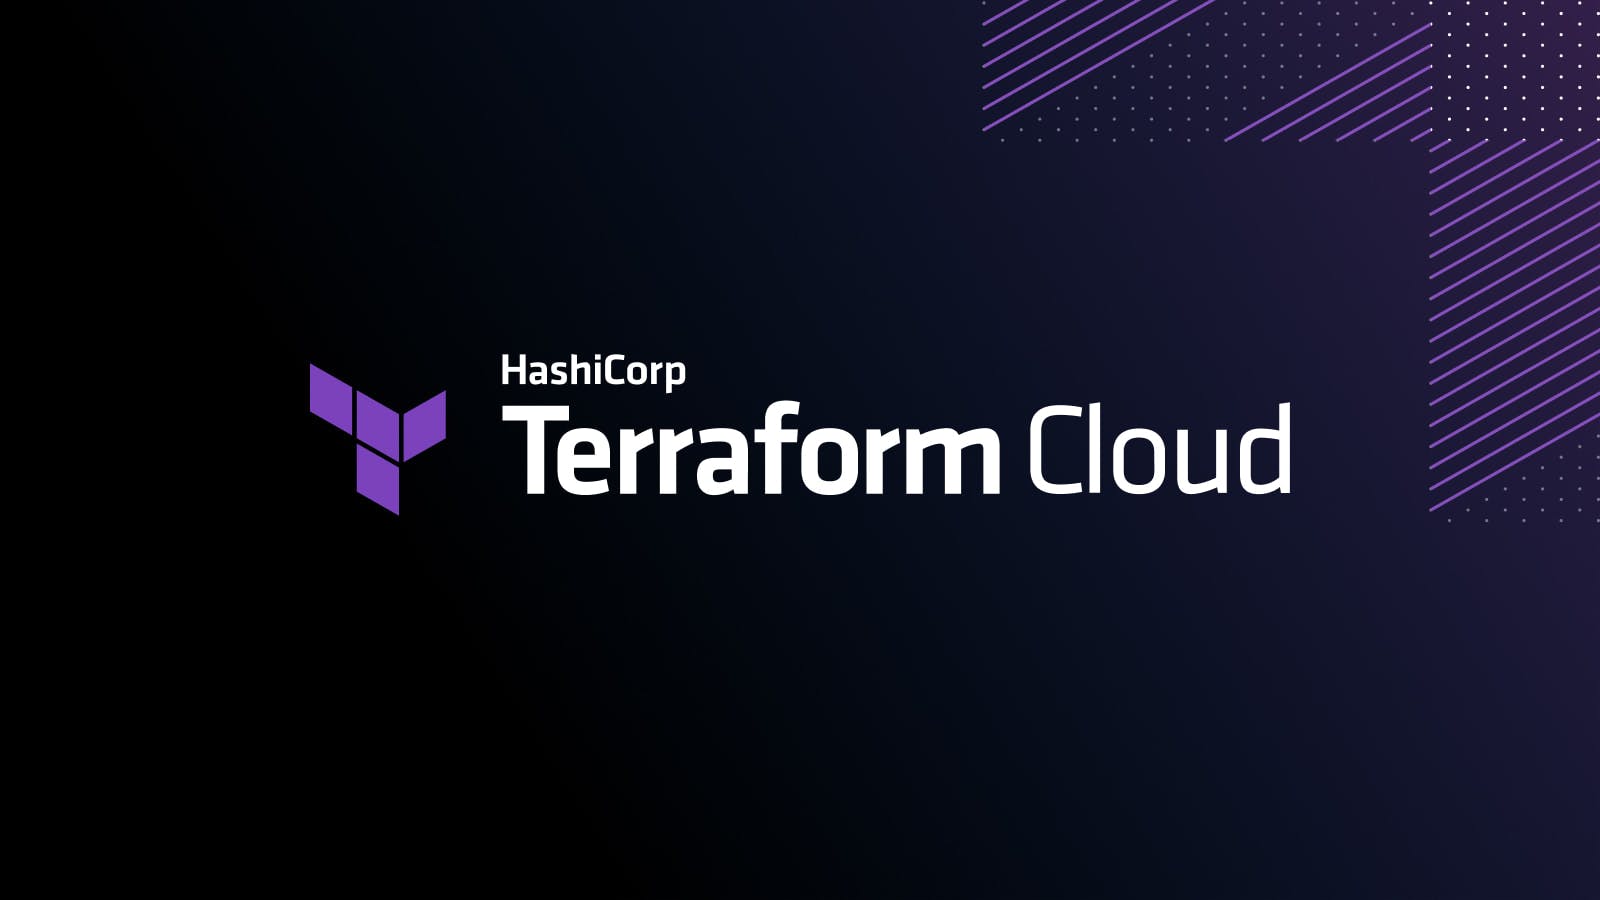 Terraform Cloud Adds ‘Projects’ to Organize Workspaces at Scale